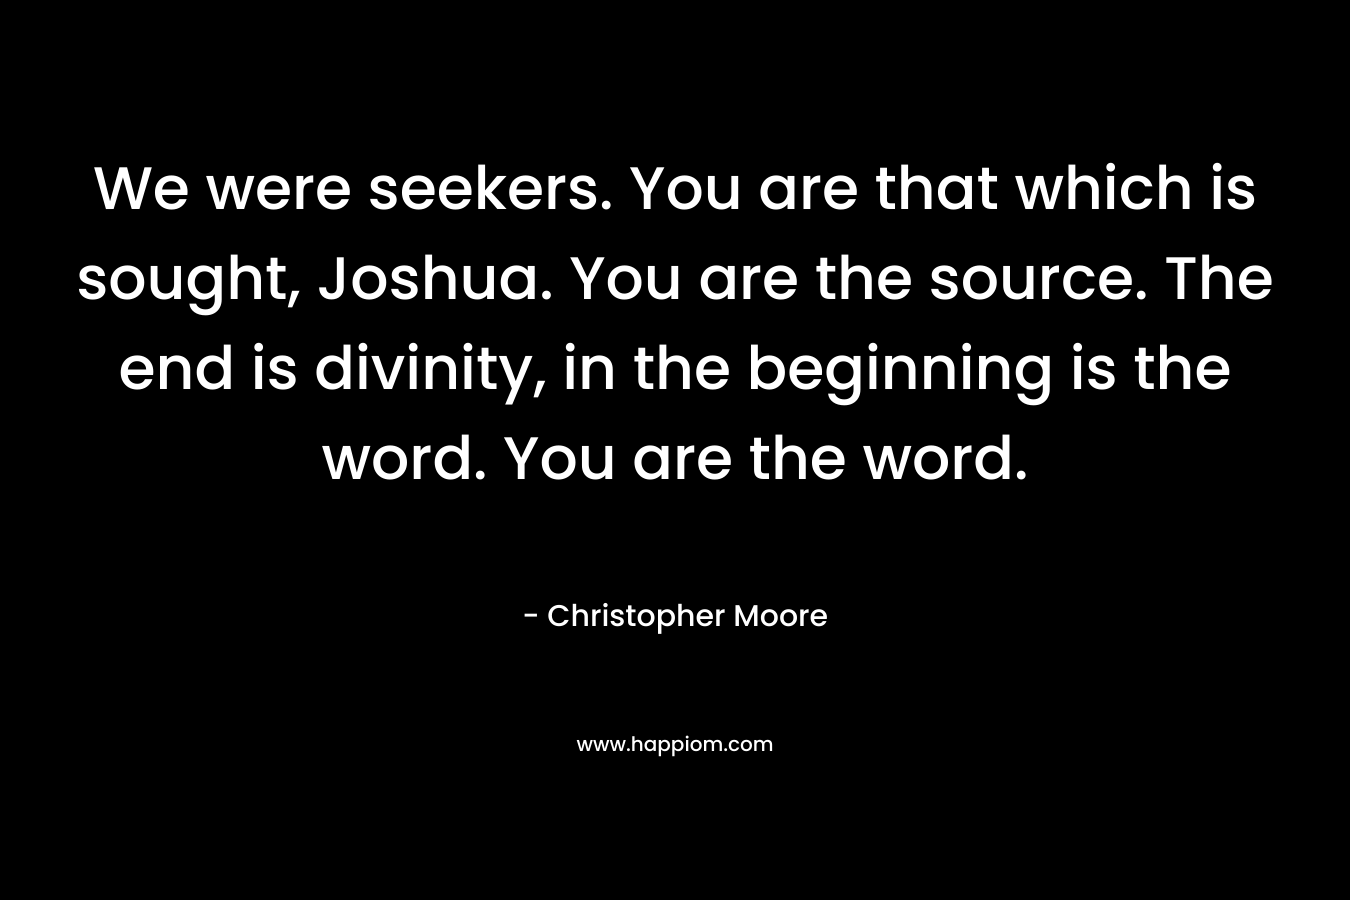 We were seekers. You are that which is sought, Joshua. You are the source. The end is divinity, in the beginning is the word. You are the word. – Christopher Moore